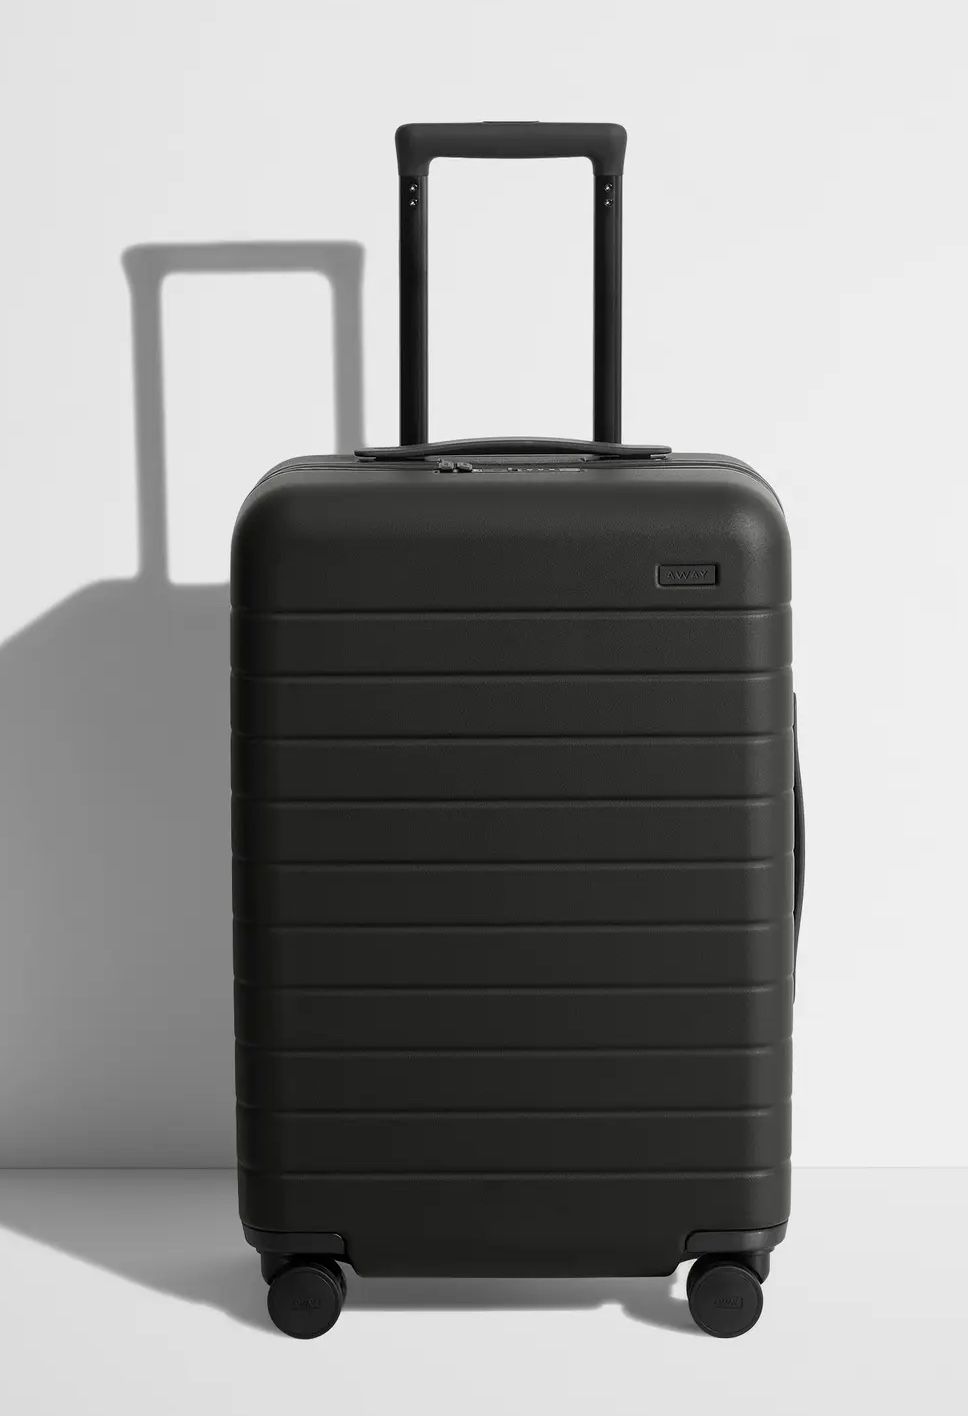 AWAY The BIGGER CARRY-ON (black)